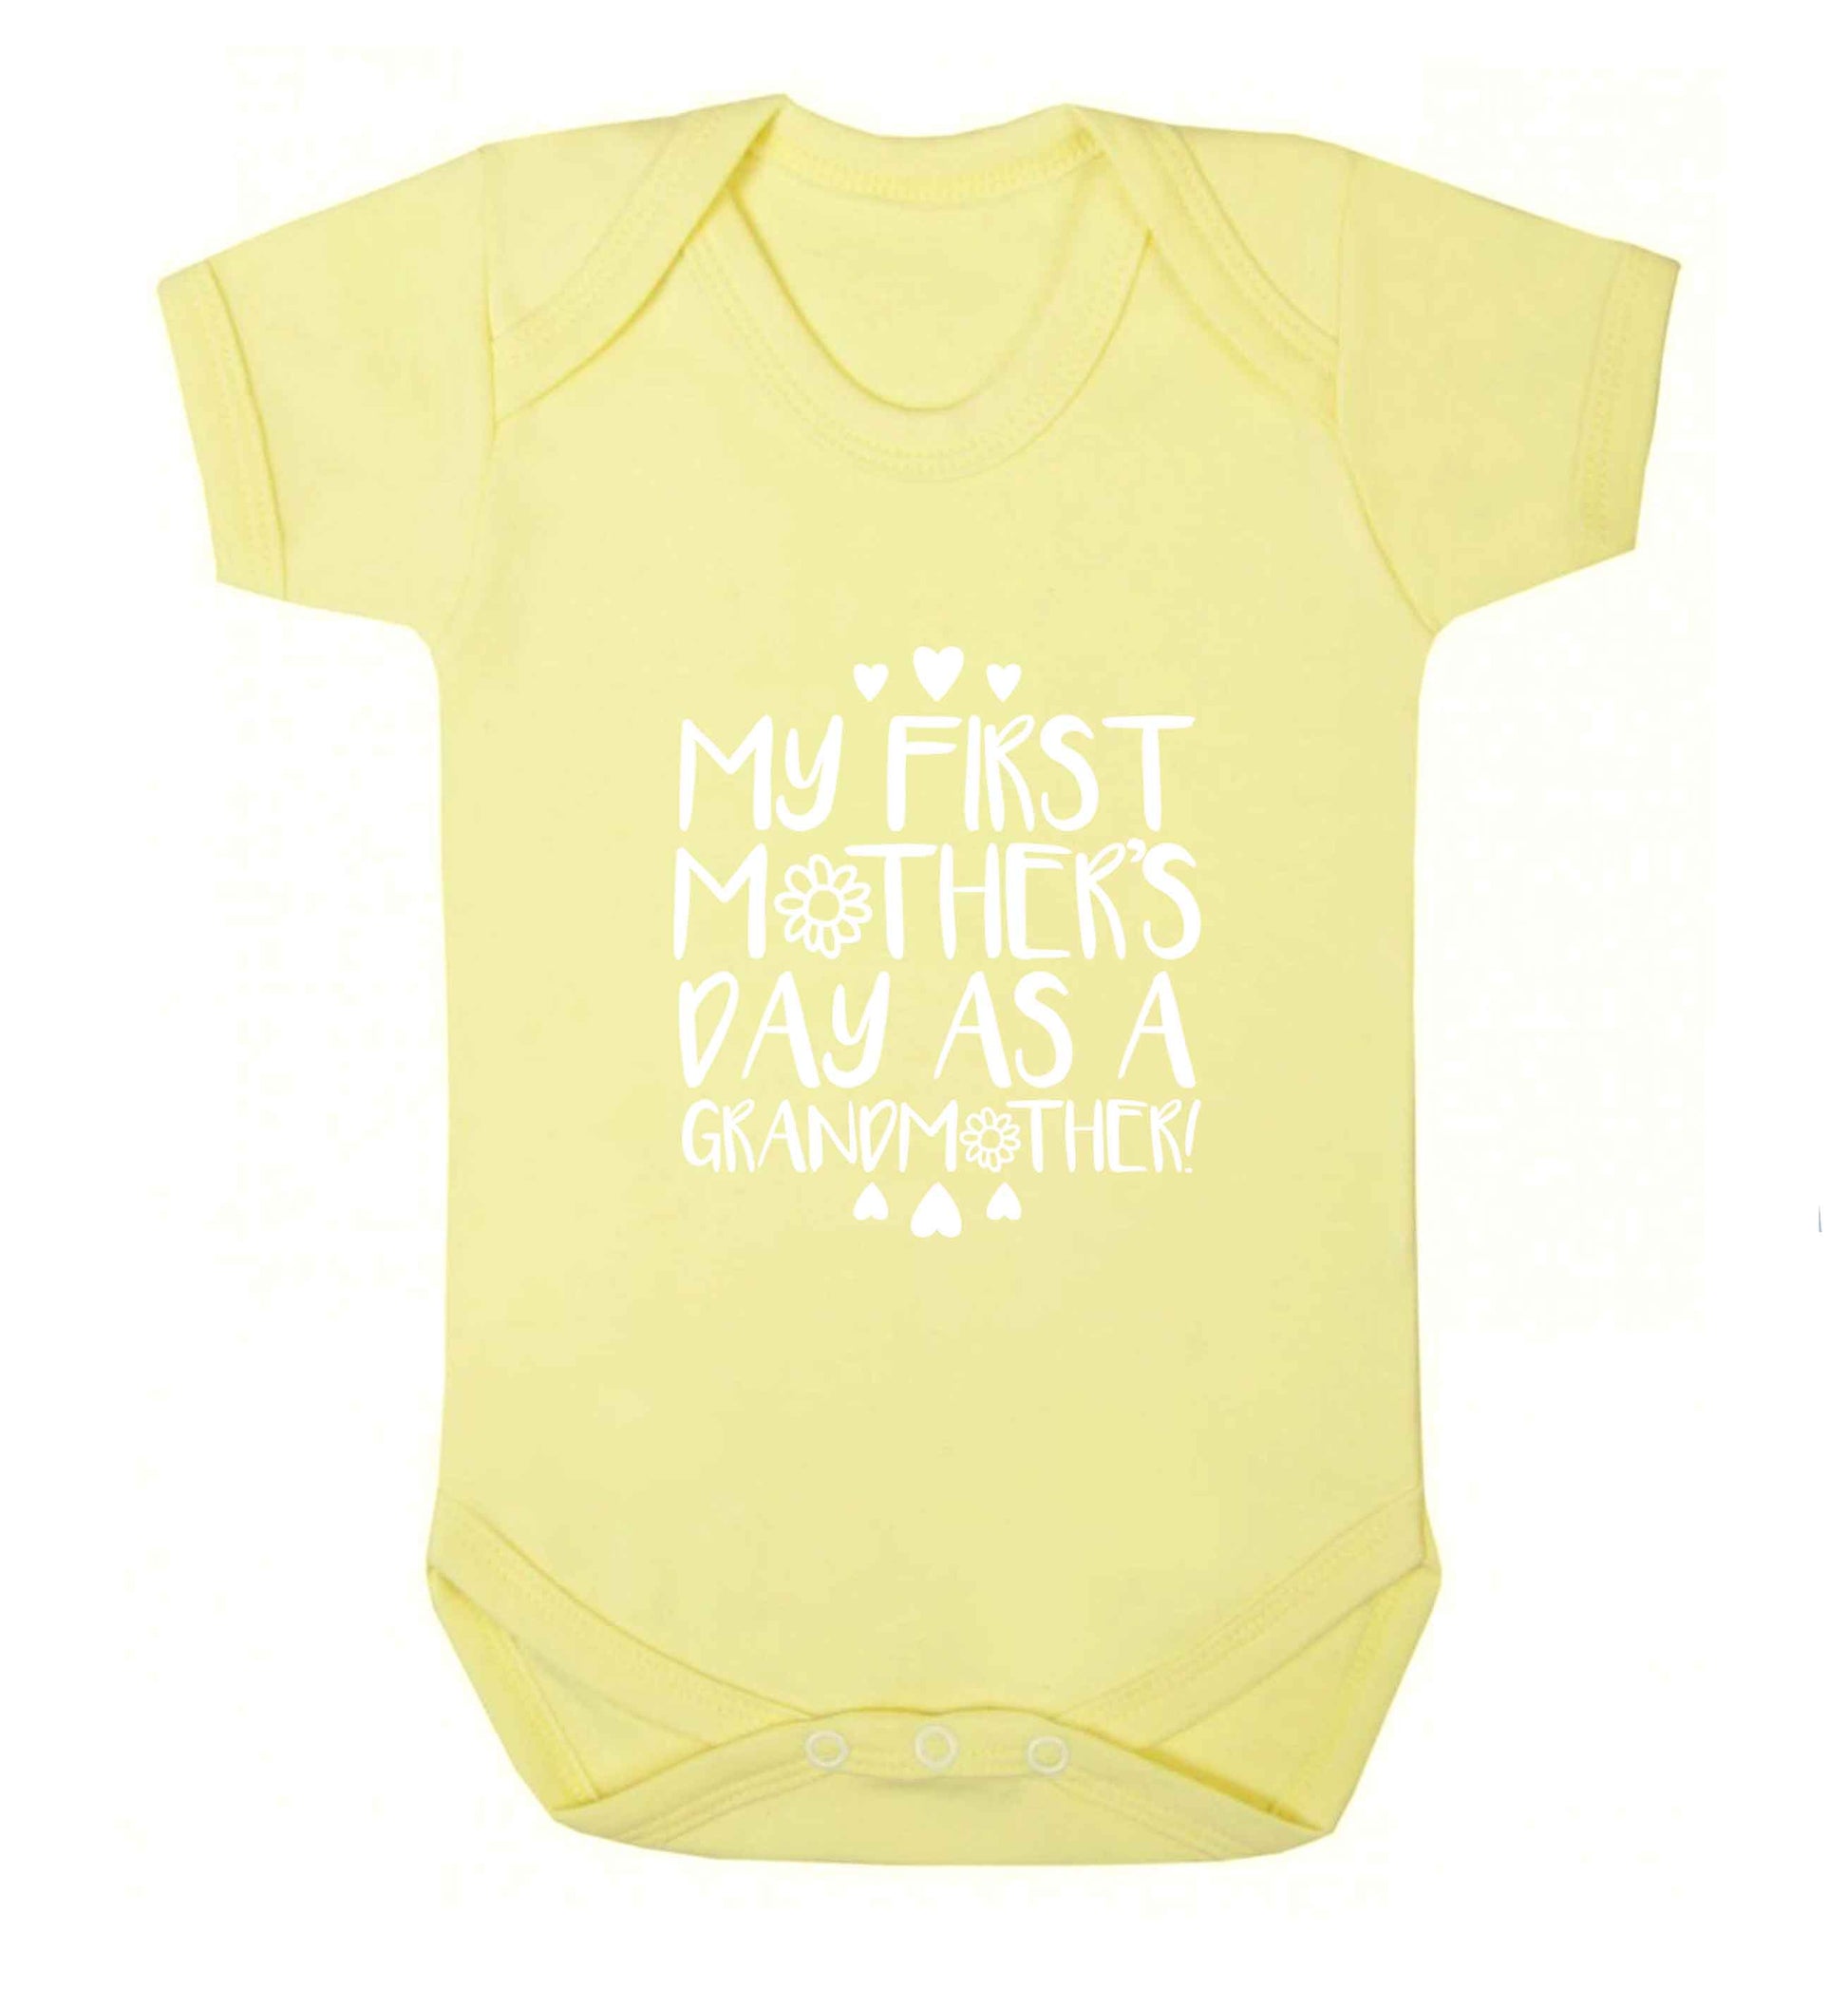 It's my first mother's day as a grandmother baby vest pale yellow 18-24 months